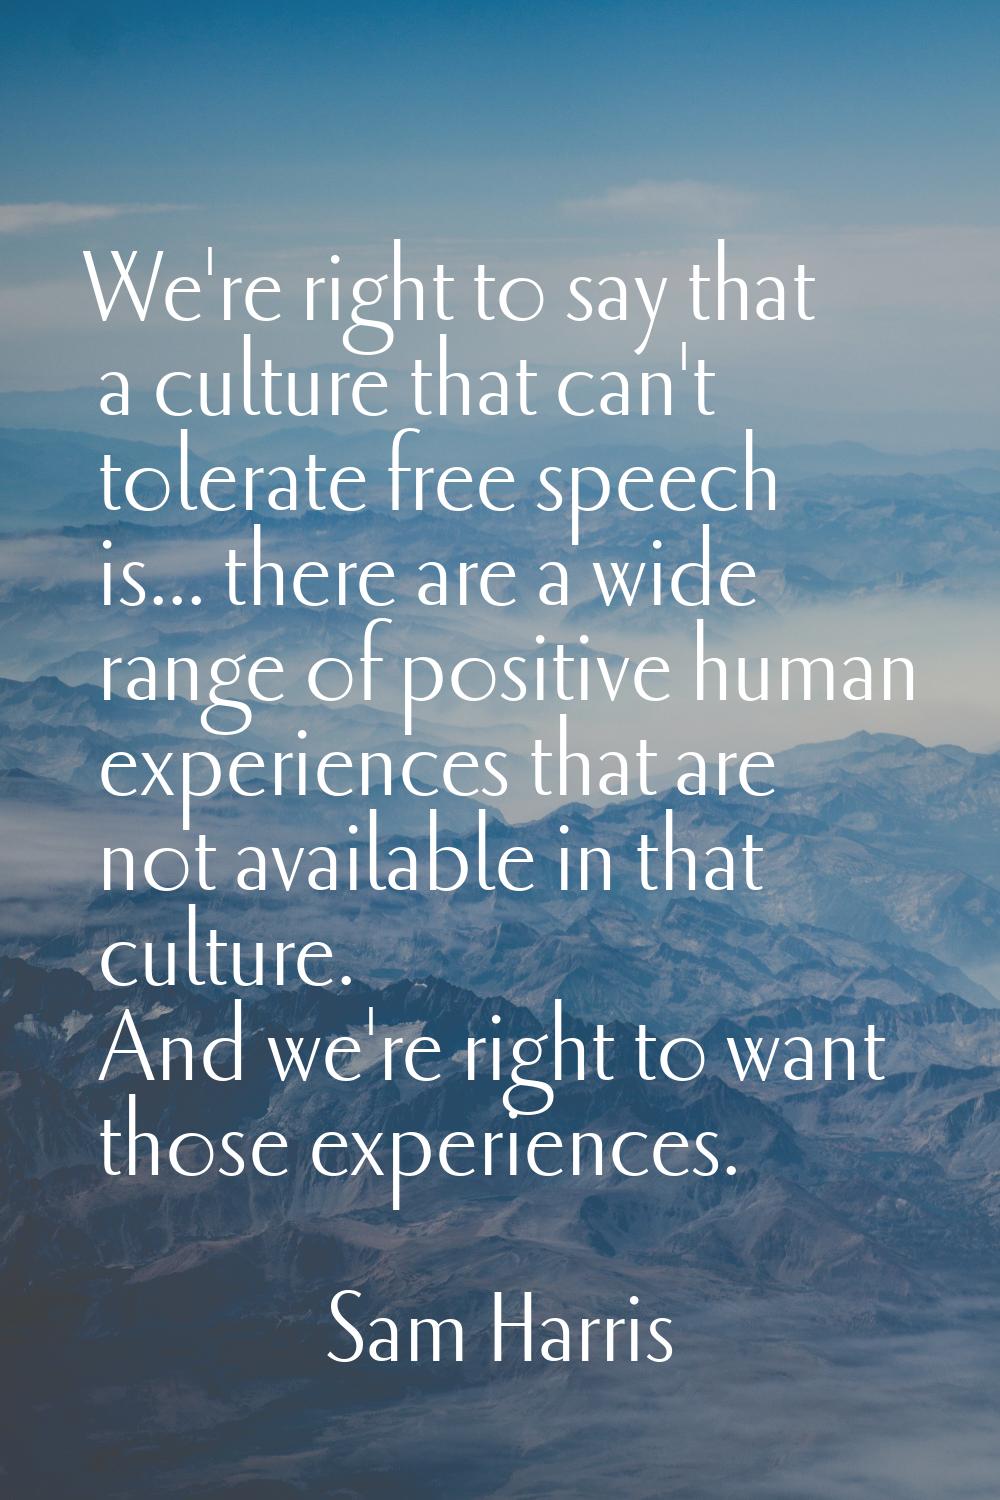 We're right to say that a culture that can't tolerate free speech is... there are a wide range of p